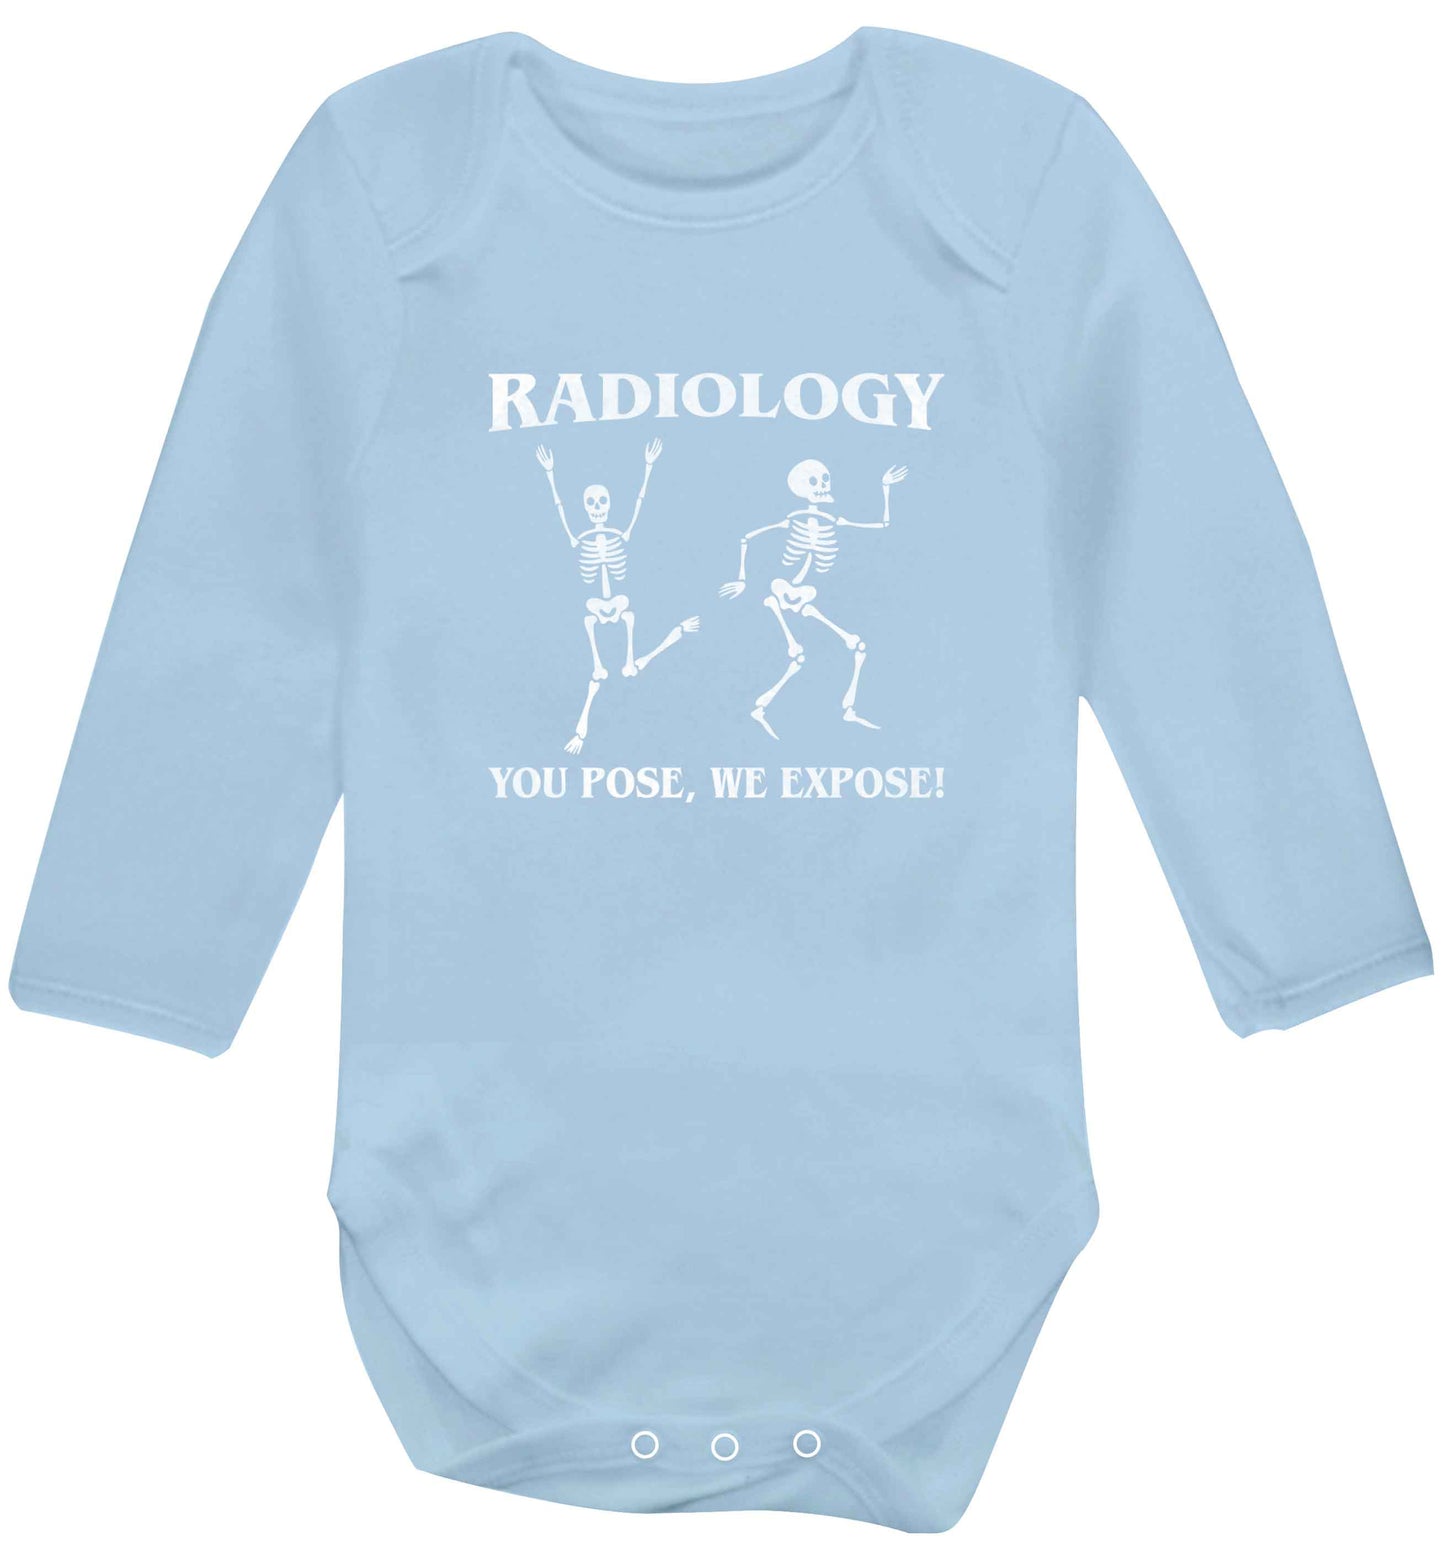 Radiology you pose we expose baby vest long sleeved pale blue 6-12 months